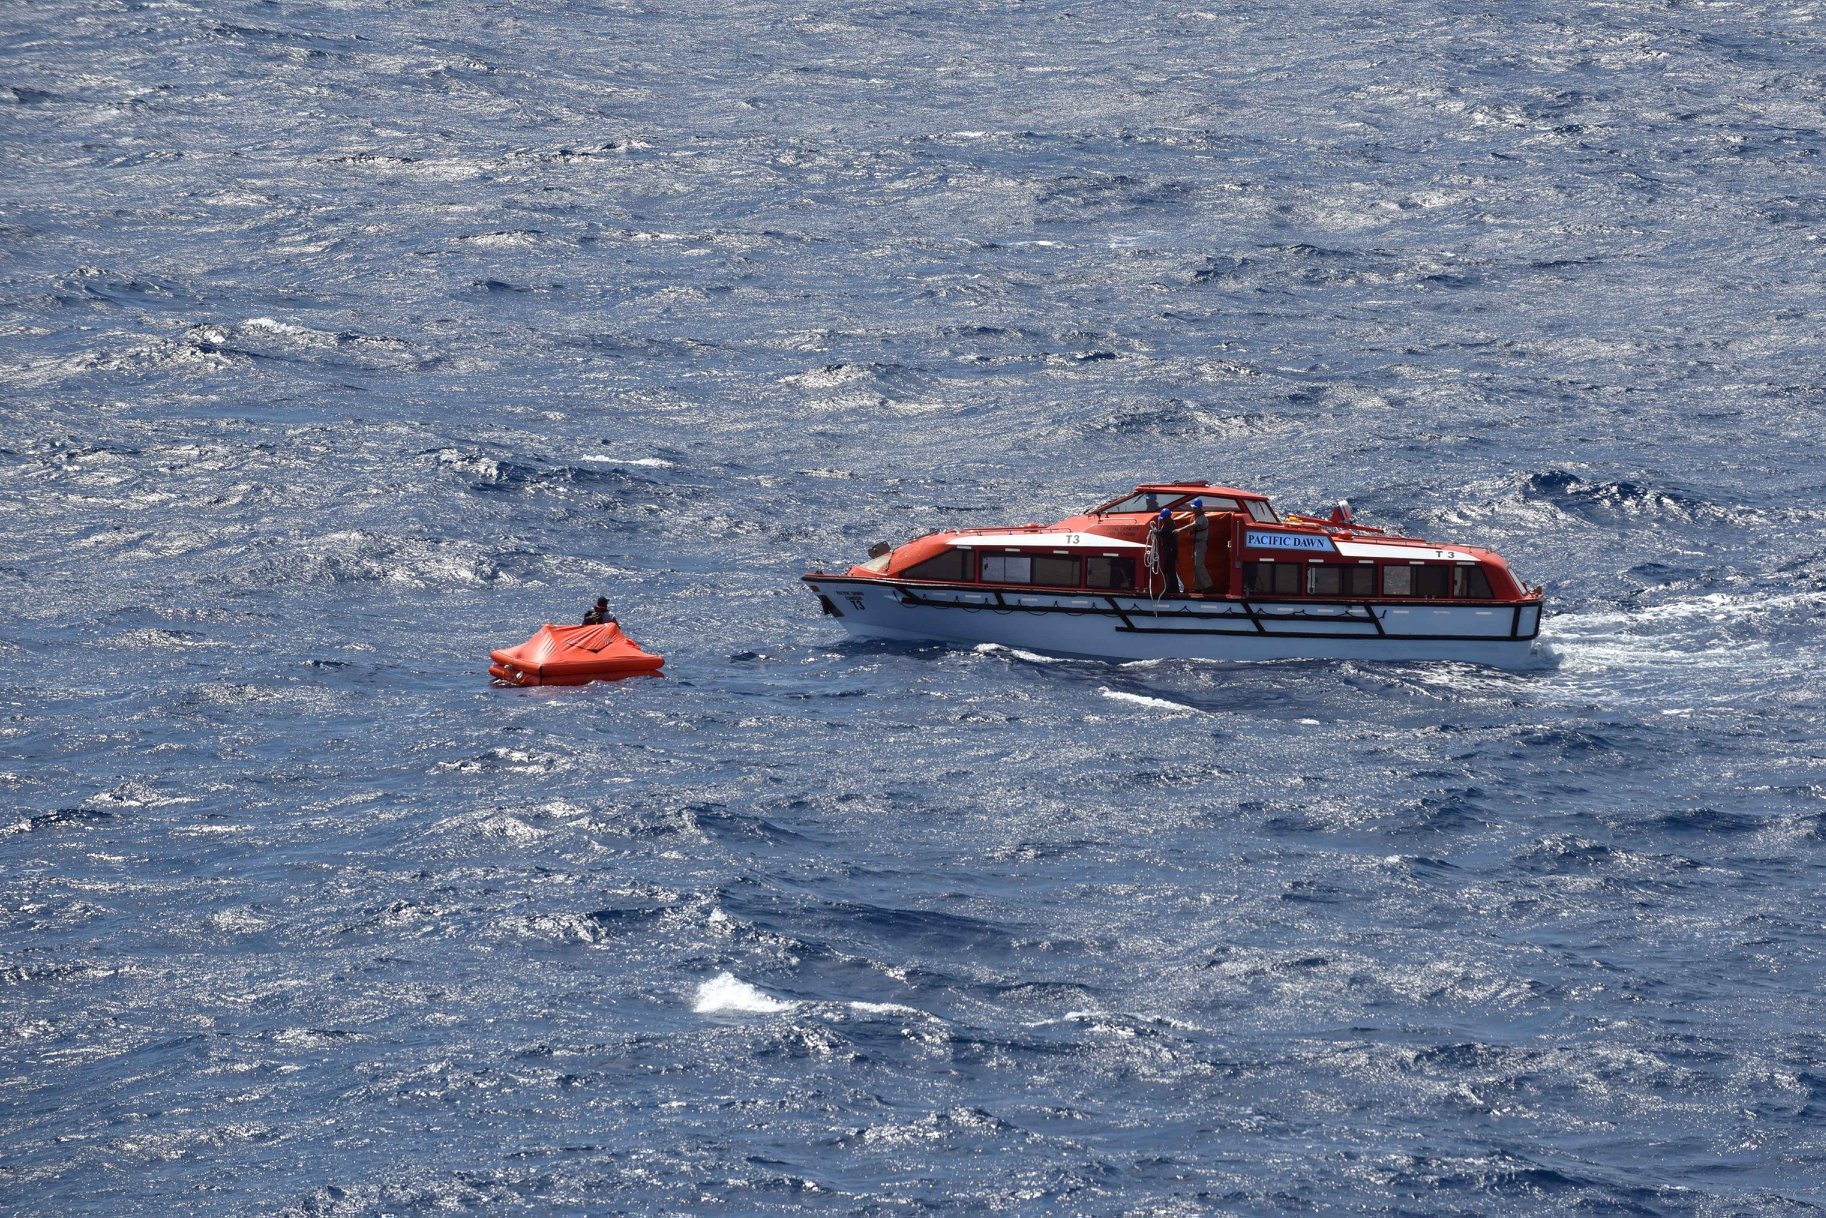 Cruise Ship Rescues 3 Men Stranded on Life Raft in the Middle of the Sea